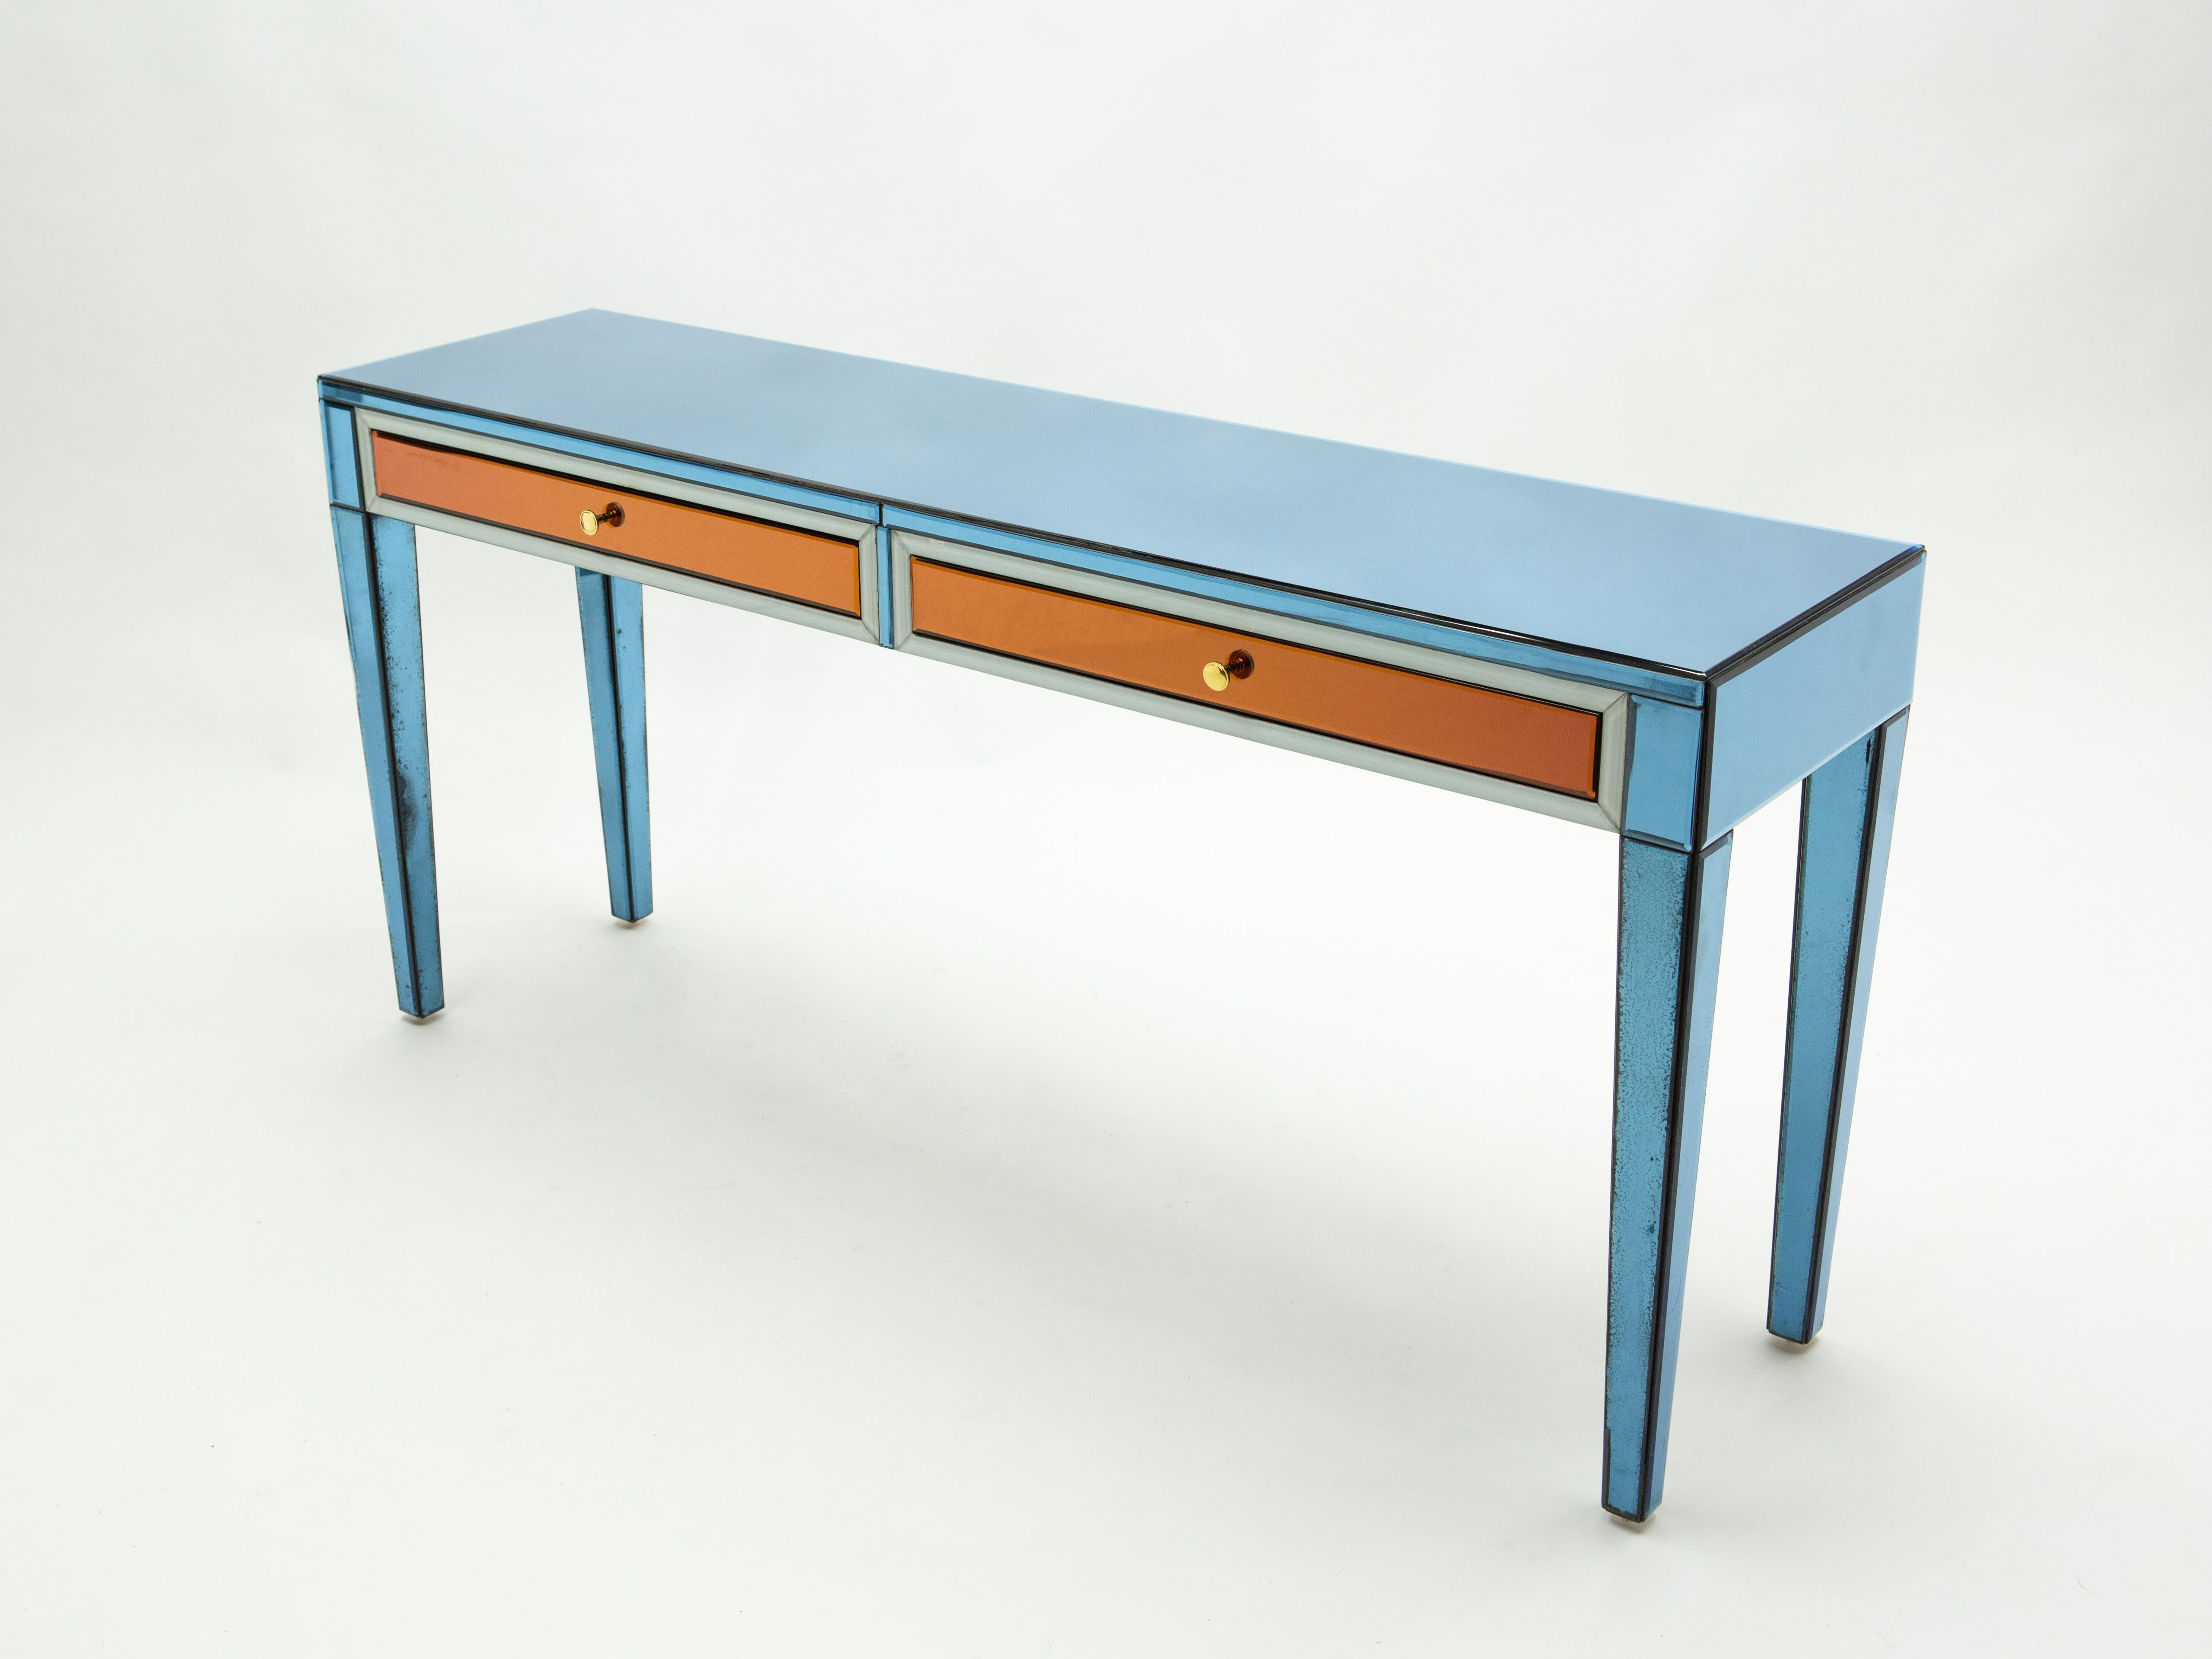 Beautiful “bleu blanc rouge” color mirrored console table designed by Olivier de Schrijver for ODE DESIGN in the 1990s. It features sleek expanses of mirrors all around, with two large drawers. Part of a limited edition of 5, this is the number 3 of